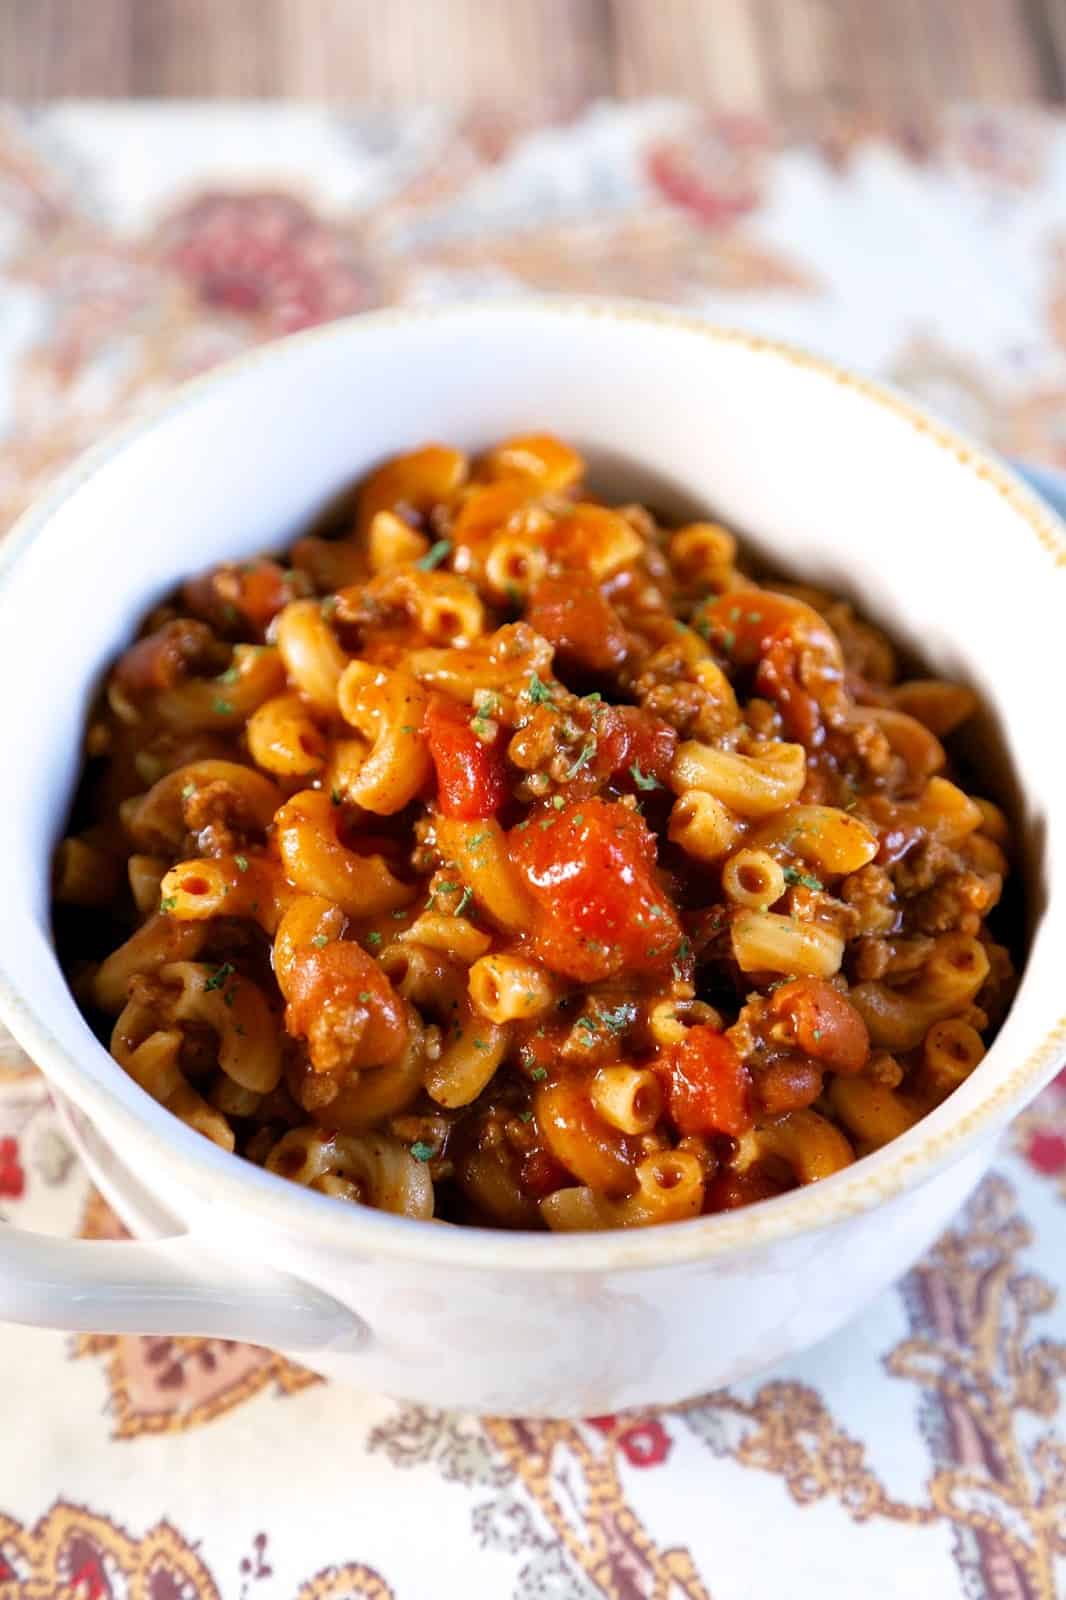 One Pot Chili Mac {No Boil} - chili and pasta simmered in the same pot! No need to precook the pasta! Hamburger, garlic, onion flakes, tomato sauce, diced tomatoes, beef broth, macaroni, chili seasoning, chili powder and chili beans.Great quick and easy weeknight meal! #chili #onepotmeal